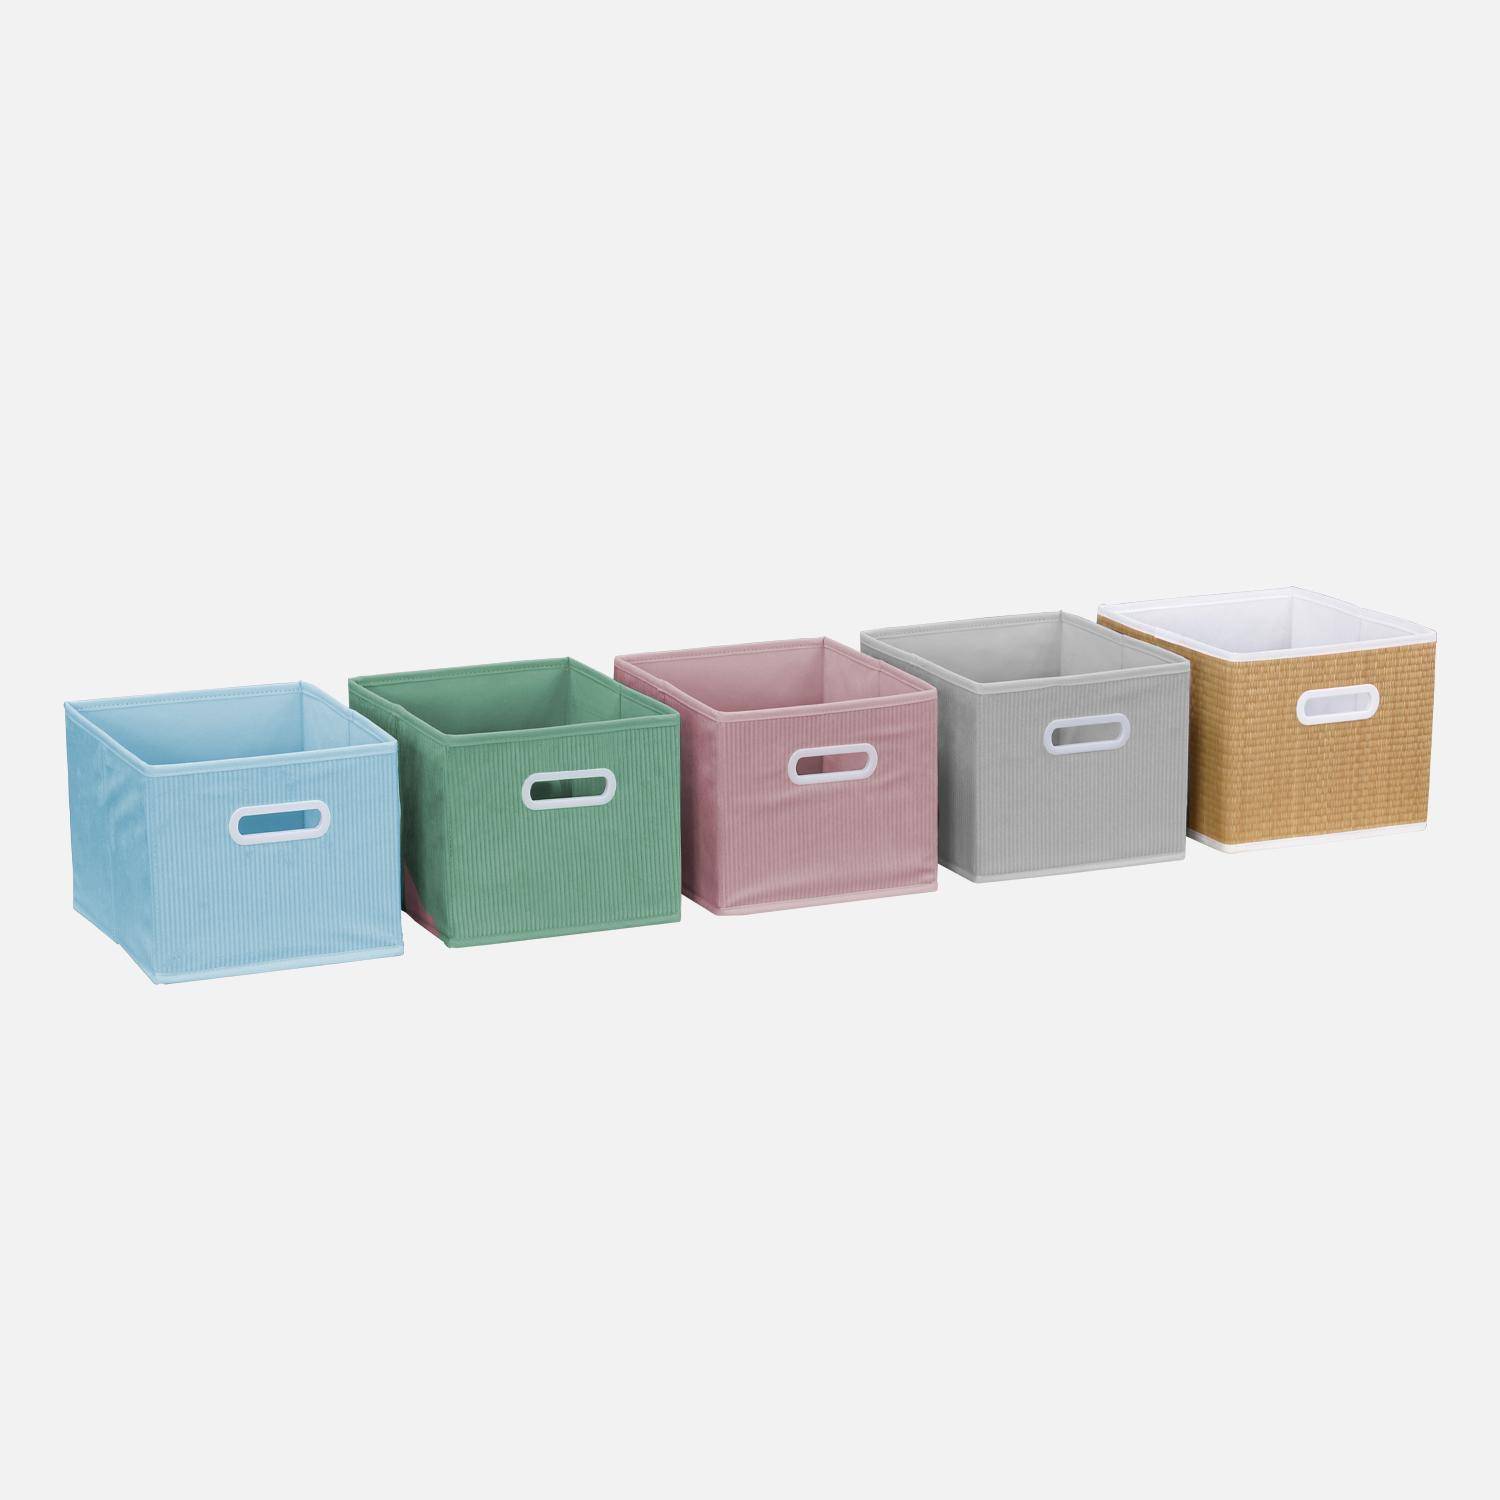 Storage unit for children with 7 compartments and 3 blue and 3 grey velvet baskets,sweeek,Photo4